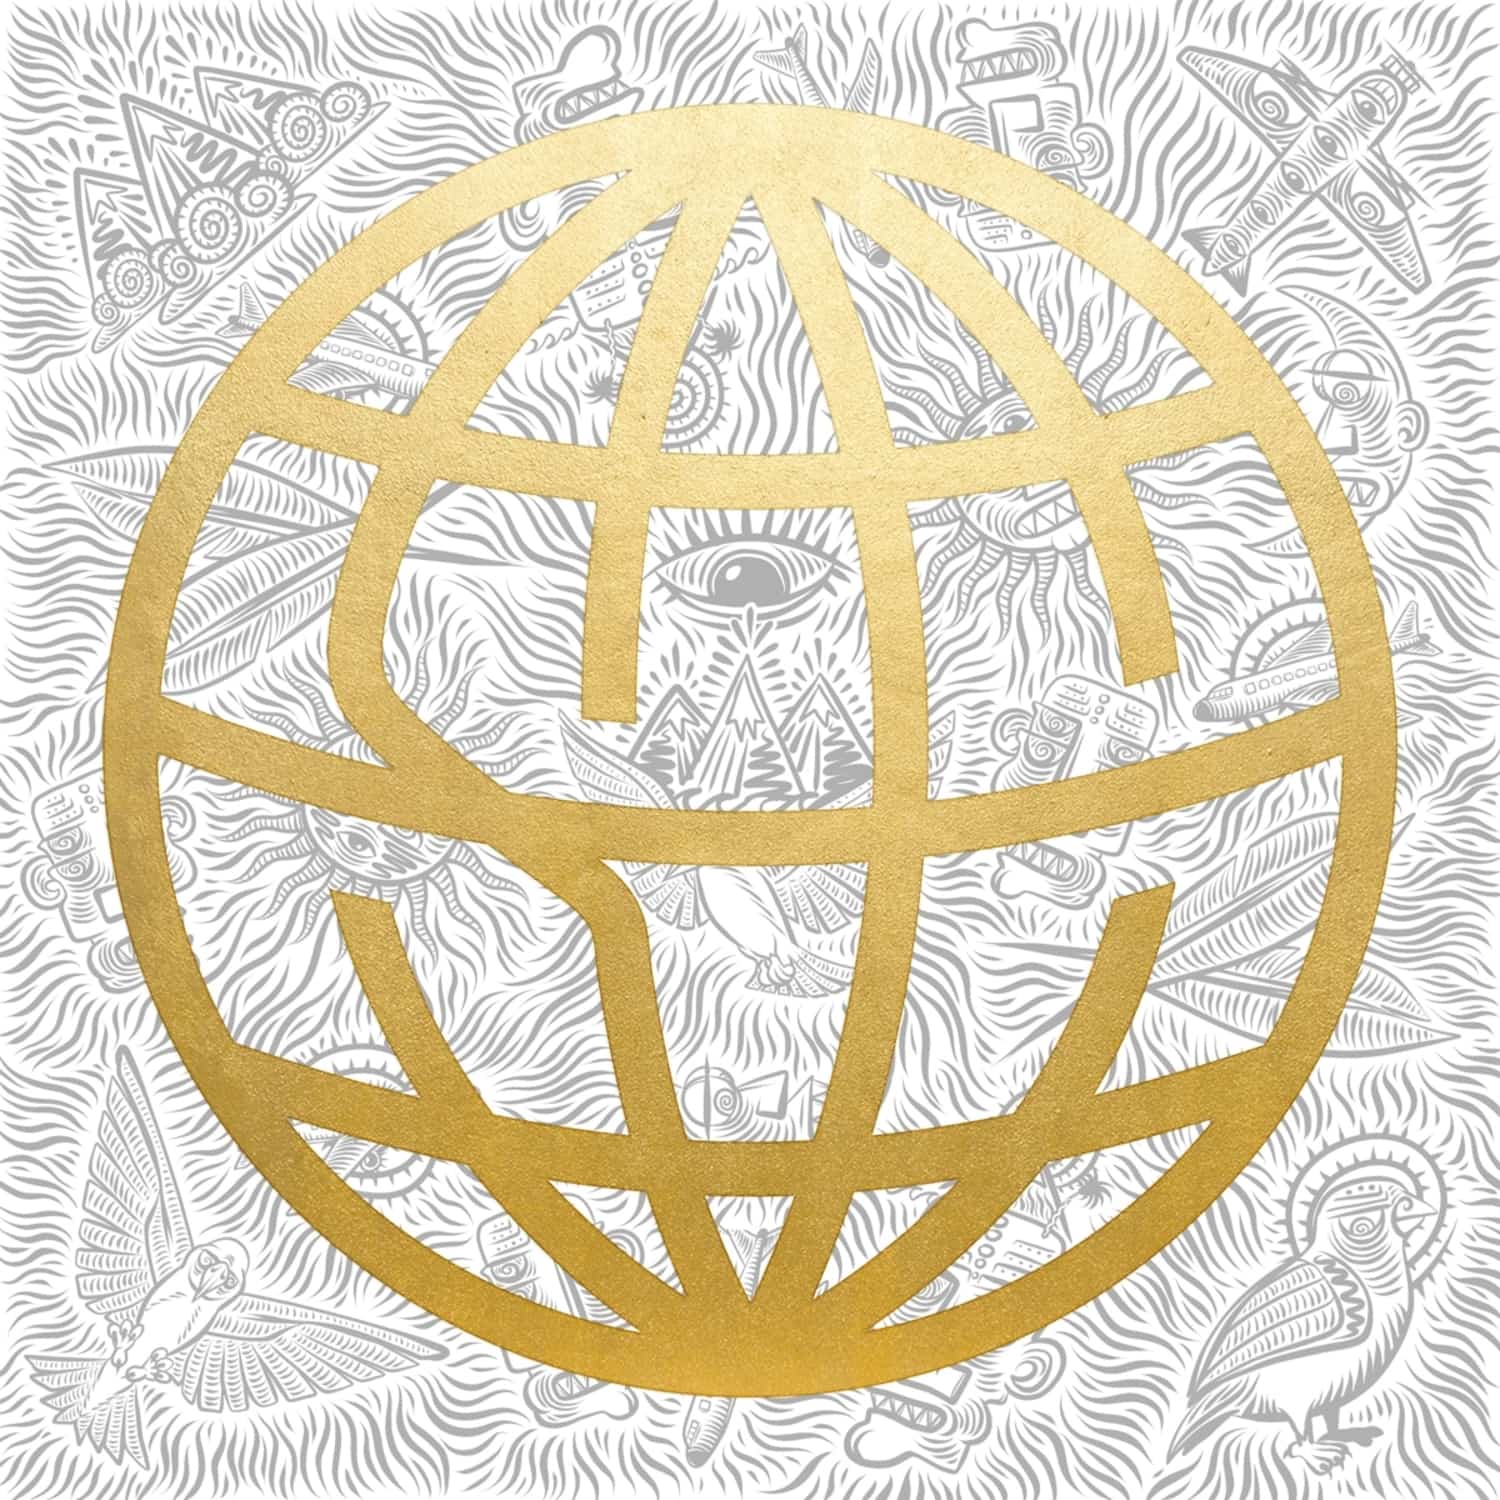 State Champs - AROUND THE WORLD AND BACK 